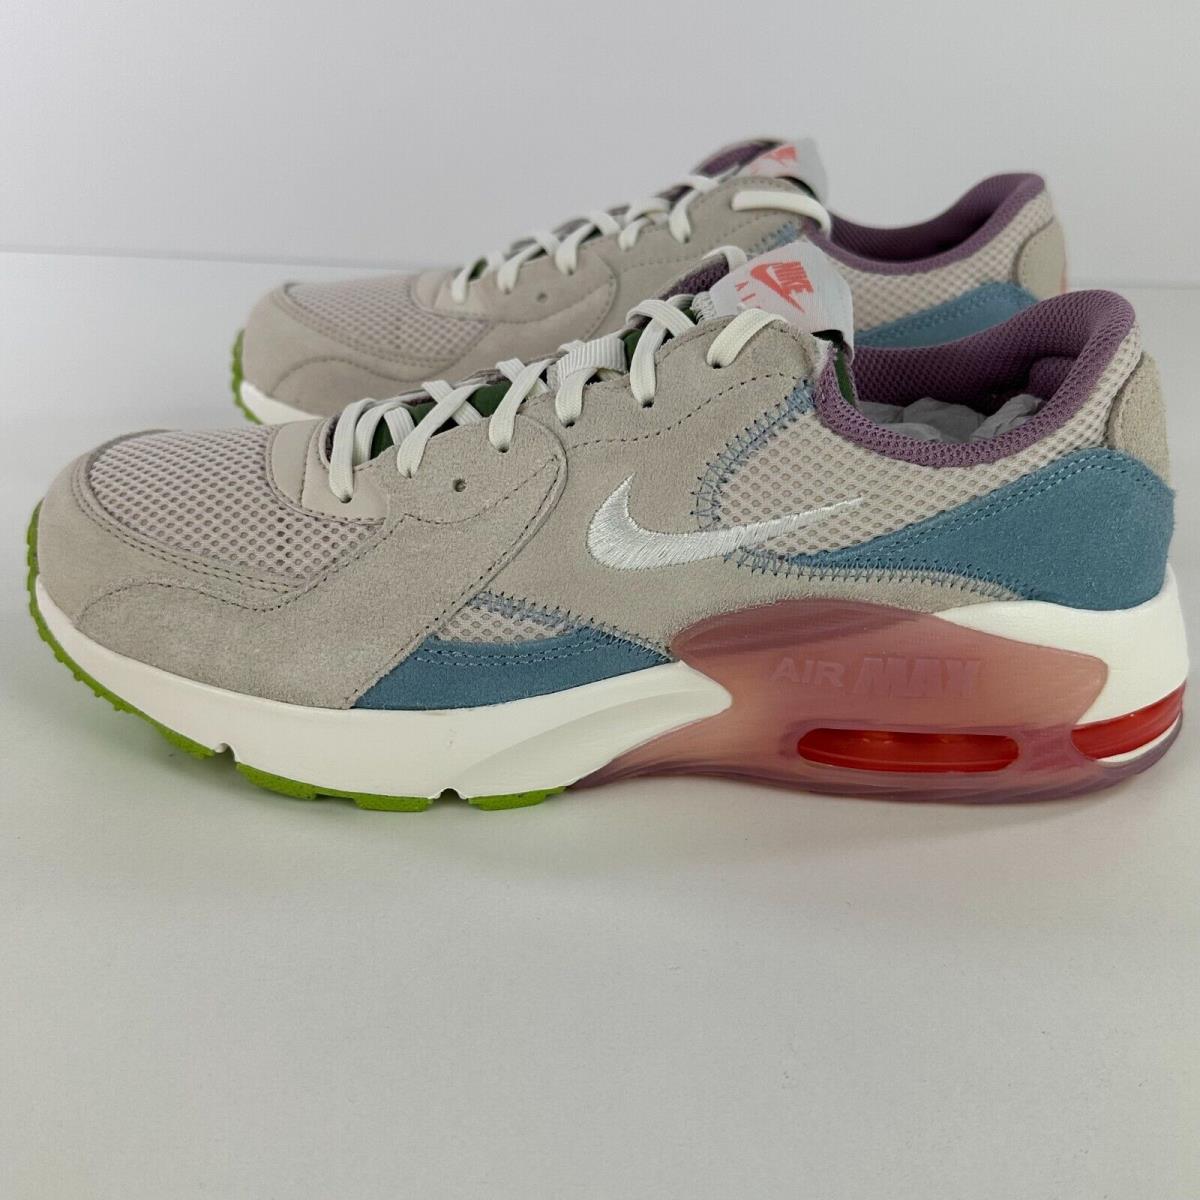 Nike shoes Air Max Excee 1